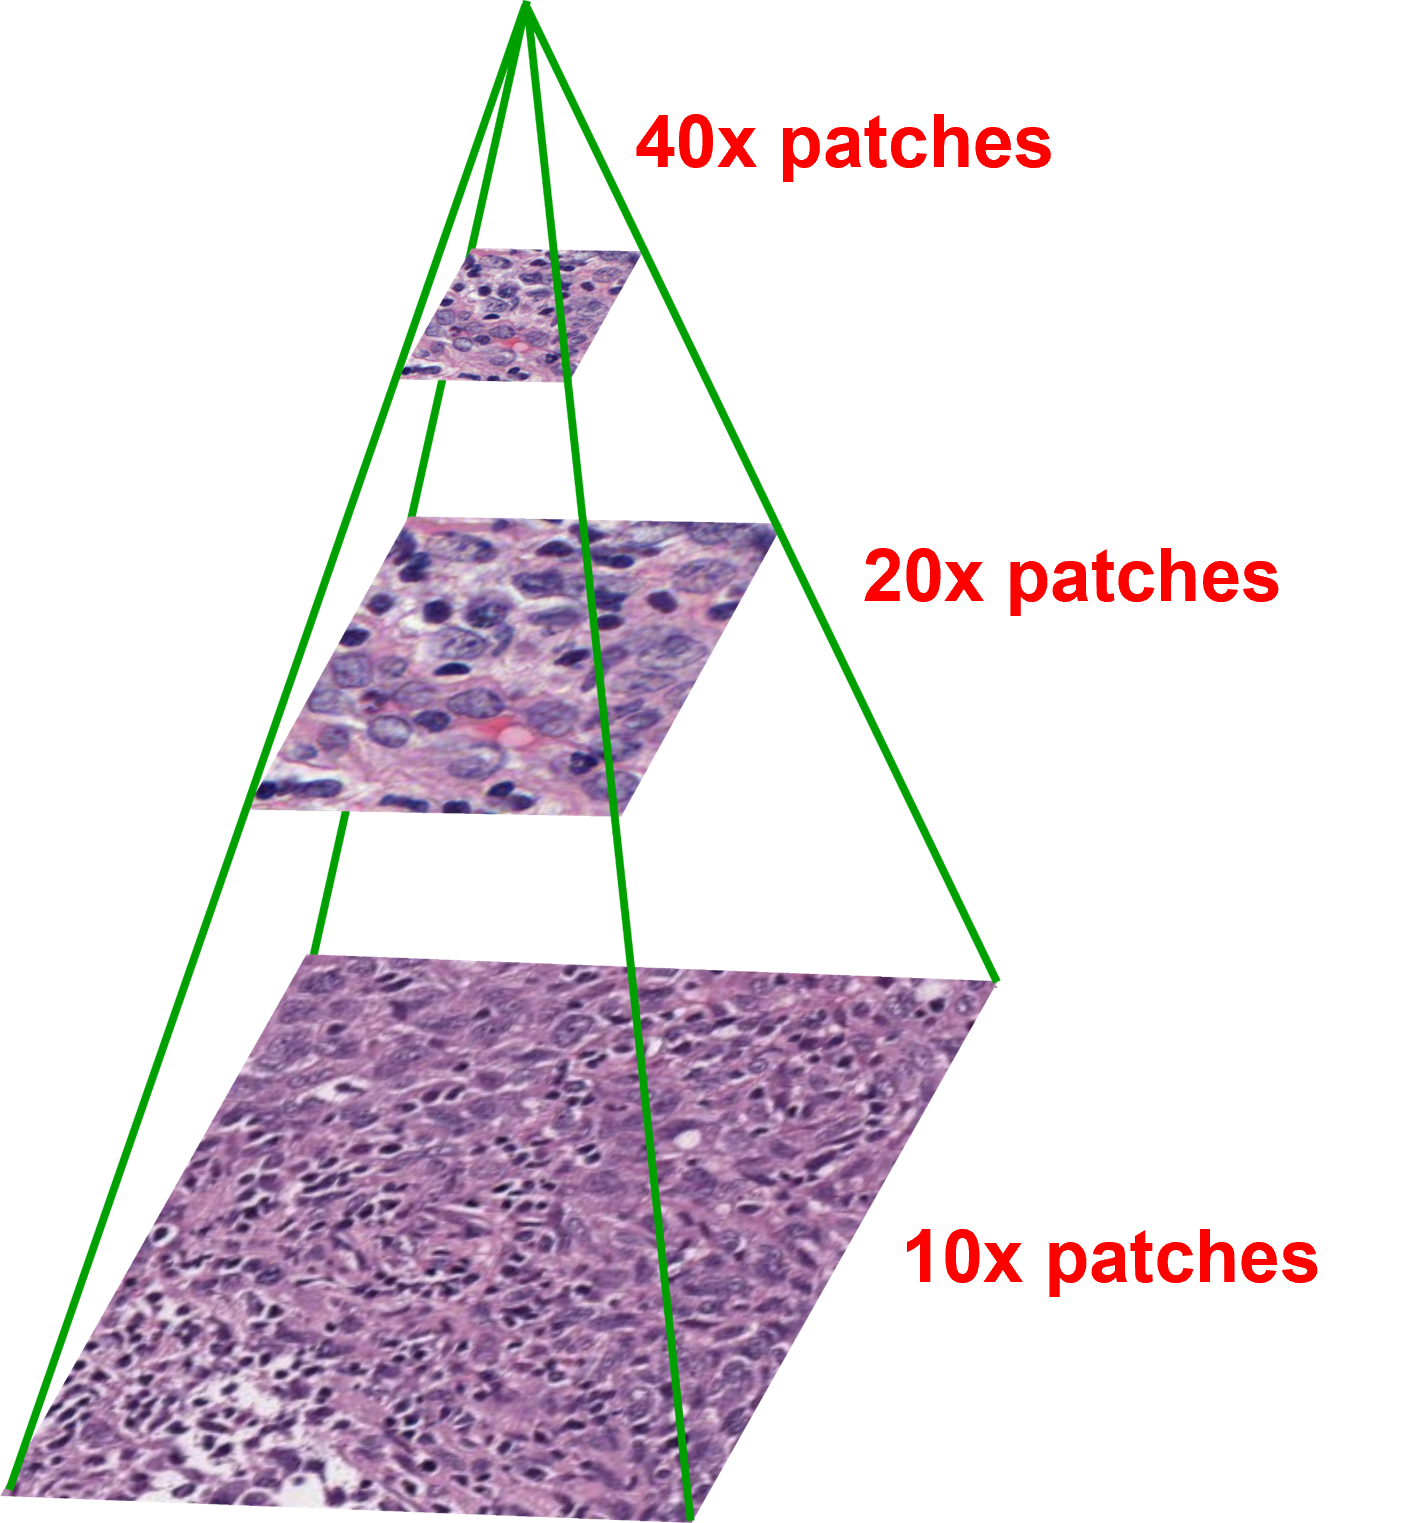 A pyramid representing different resolutions of histopathology slides from top to bottom moving from 10 times, 20 times and 40 times magnification